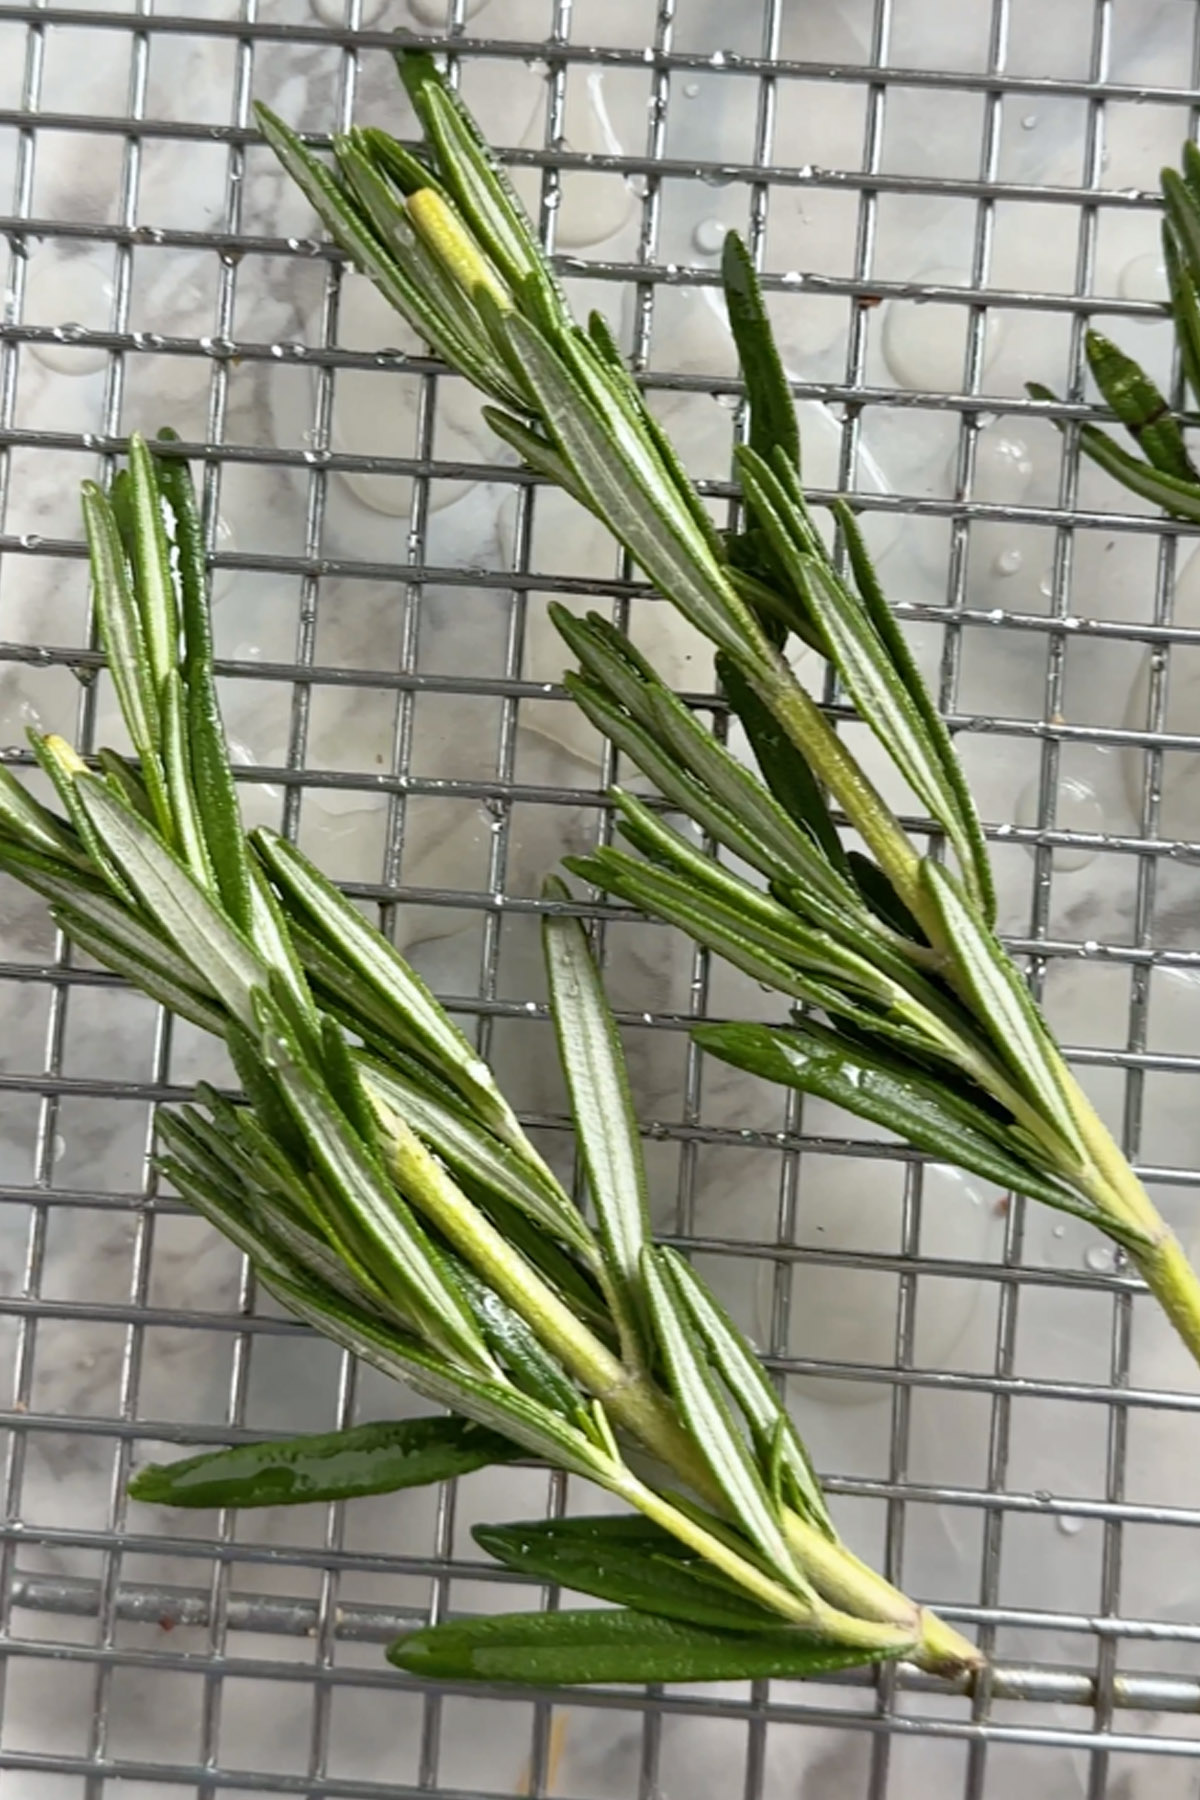 Rosemary dries on a wire rack.